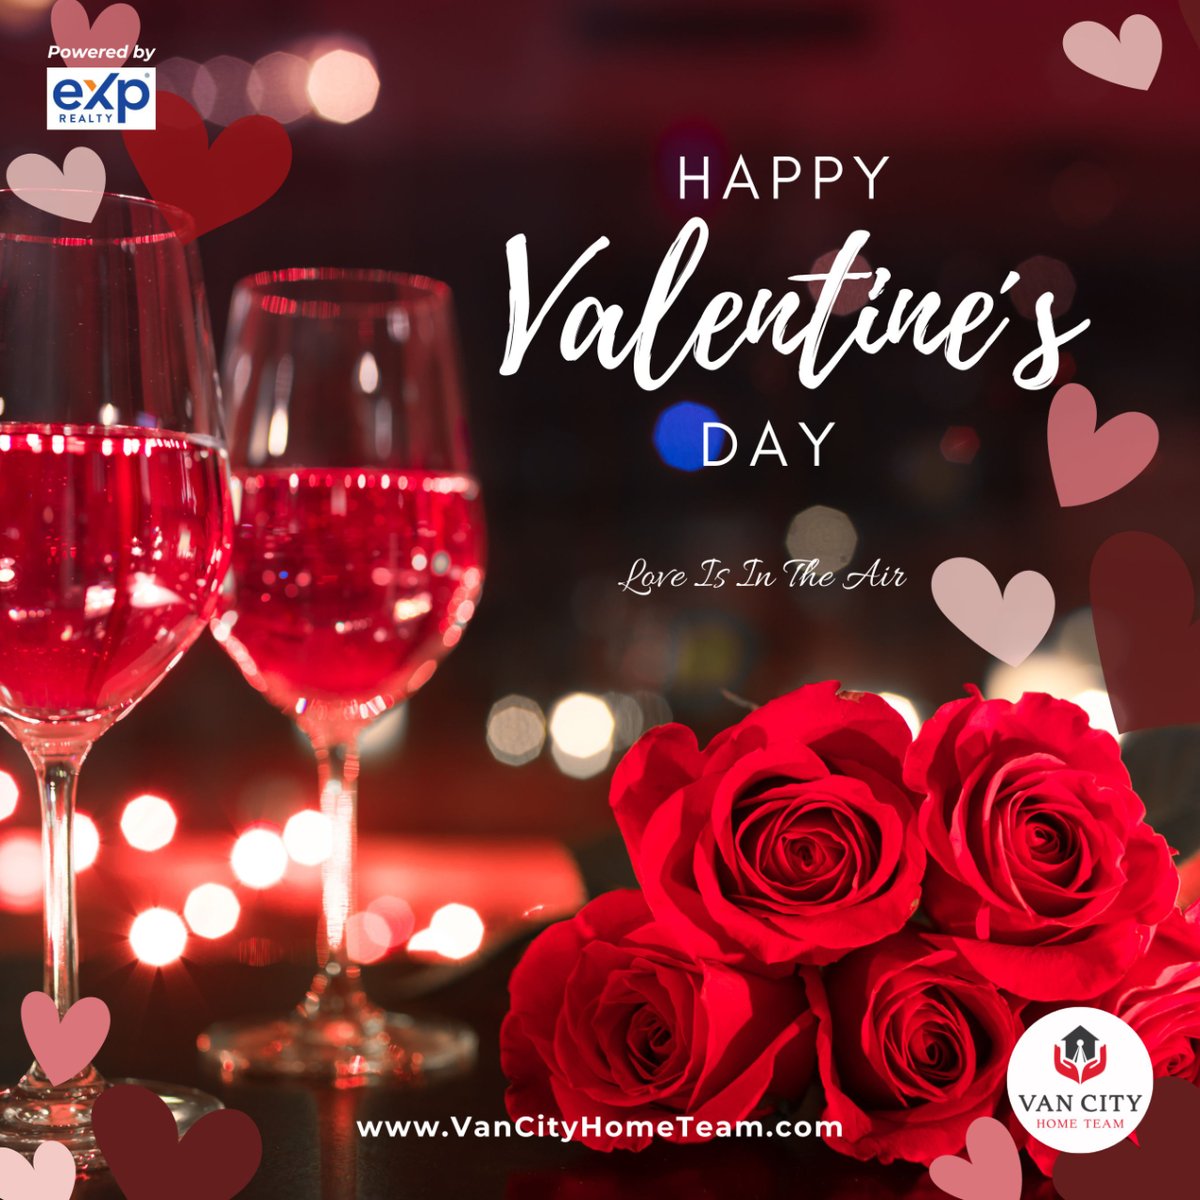 Sending warm wishes and lots of love your way this Valentine's Day! May your day be filled with joy, laughter, and cherished moments with your loved ones. Happy Valentine's Day to all! #LoveIsInTheAir #SpreadLove #ValentineVibes #HeartfeltMoments